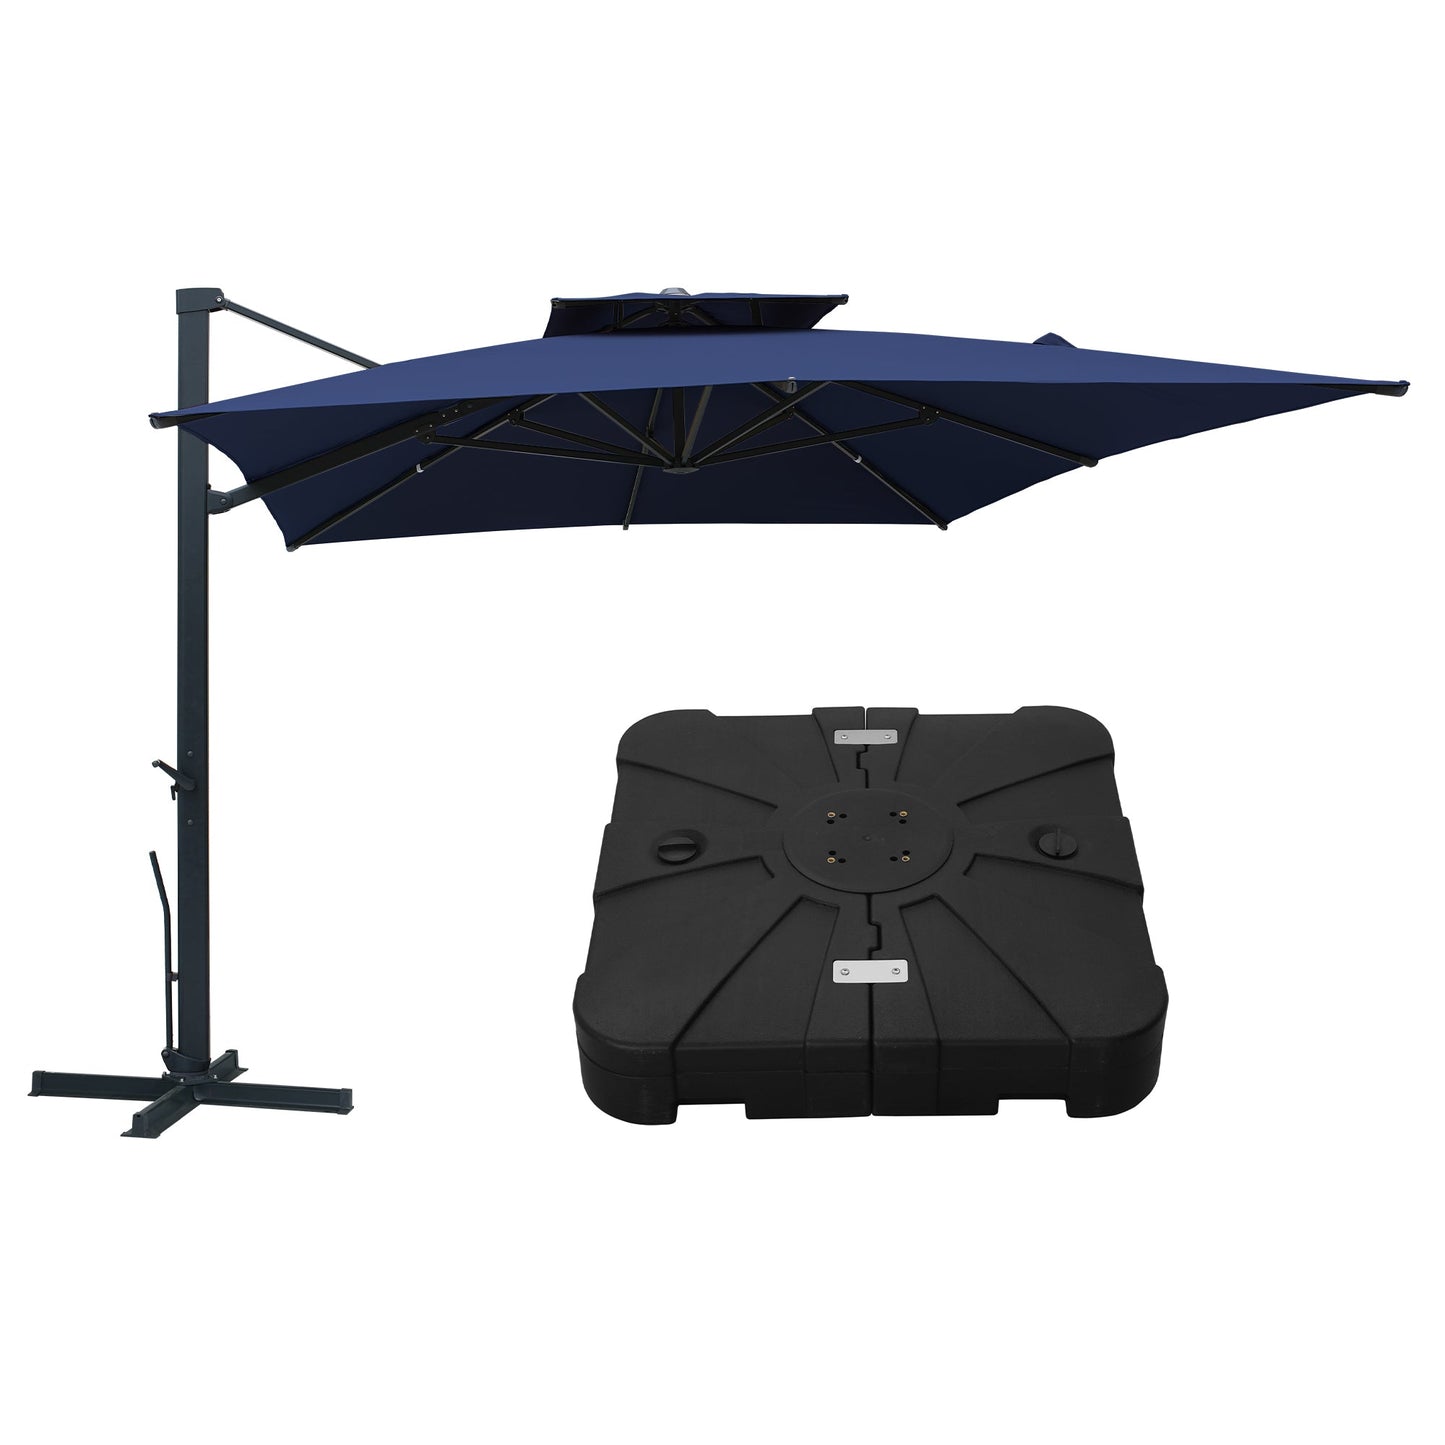 MONDAWE 13ft Patio Double Top Bright Umbrella 360 Rotation Umbrella With Base Stand Included